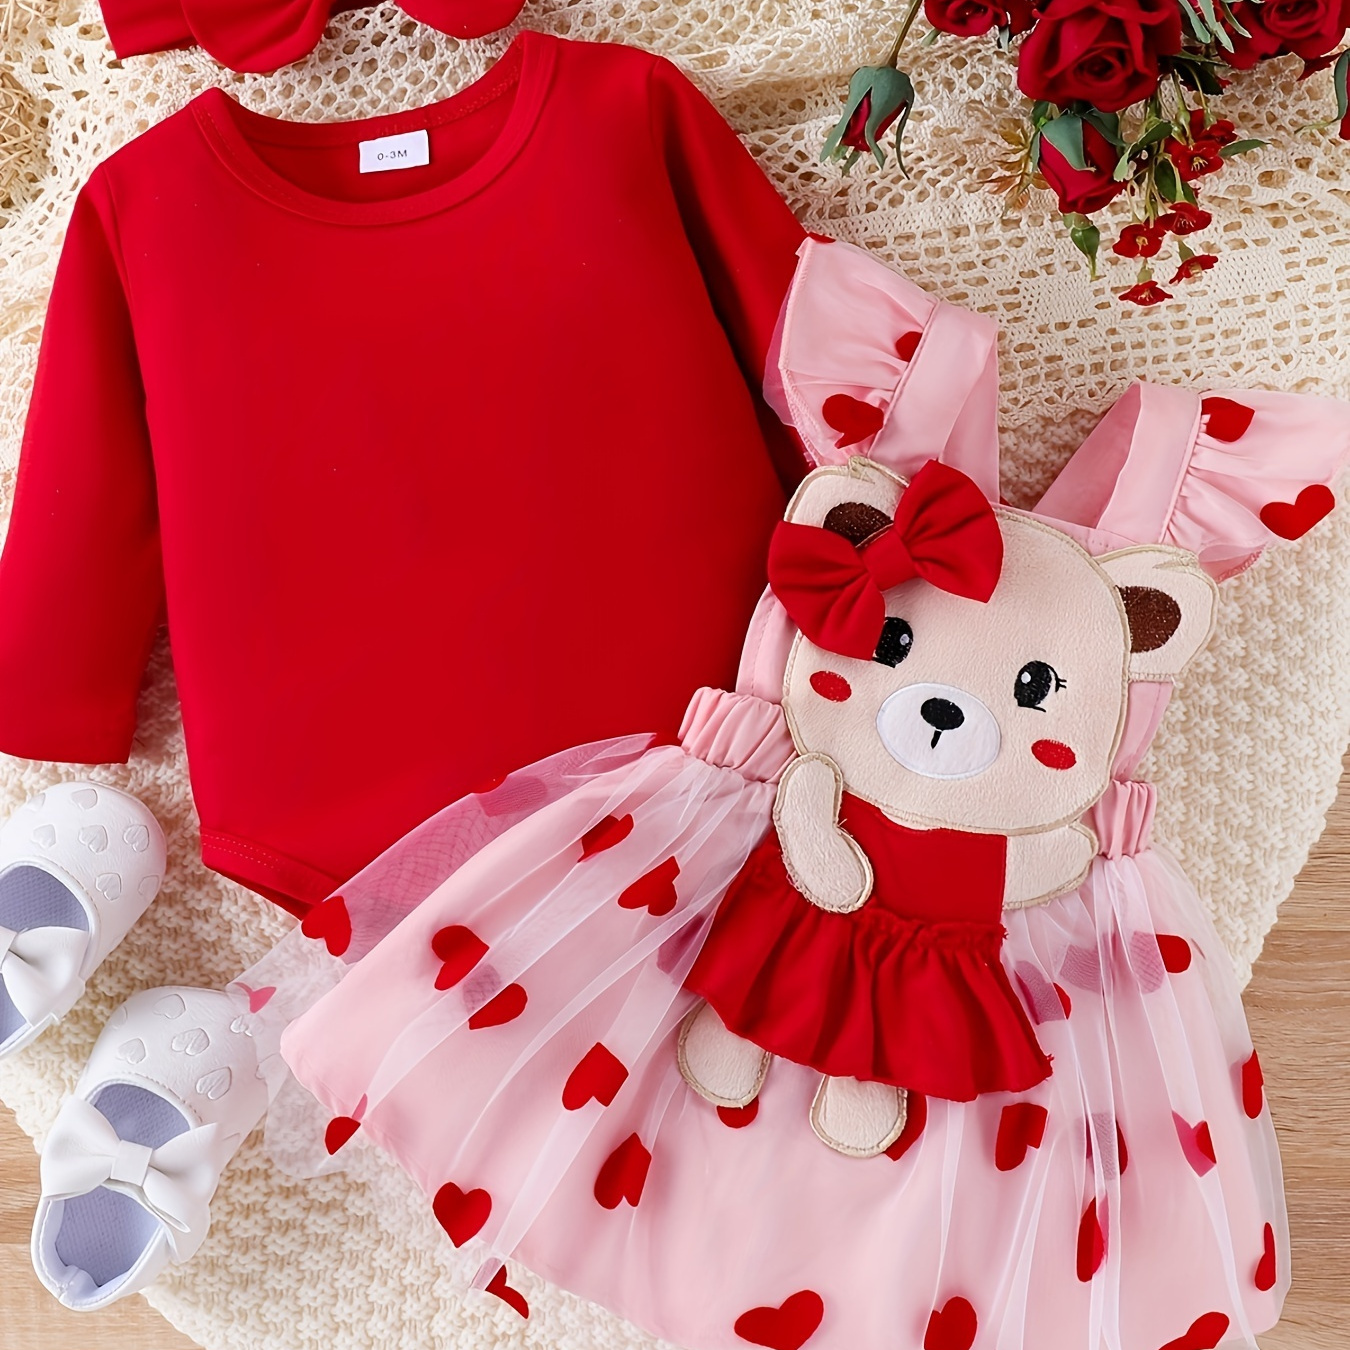 

2pcs Infant's Heart Pattern Lovely Outfit, Long Sleeve Romper & Bear Patchwork Mesh Overall Dress, Baby Girl's Clothes